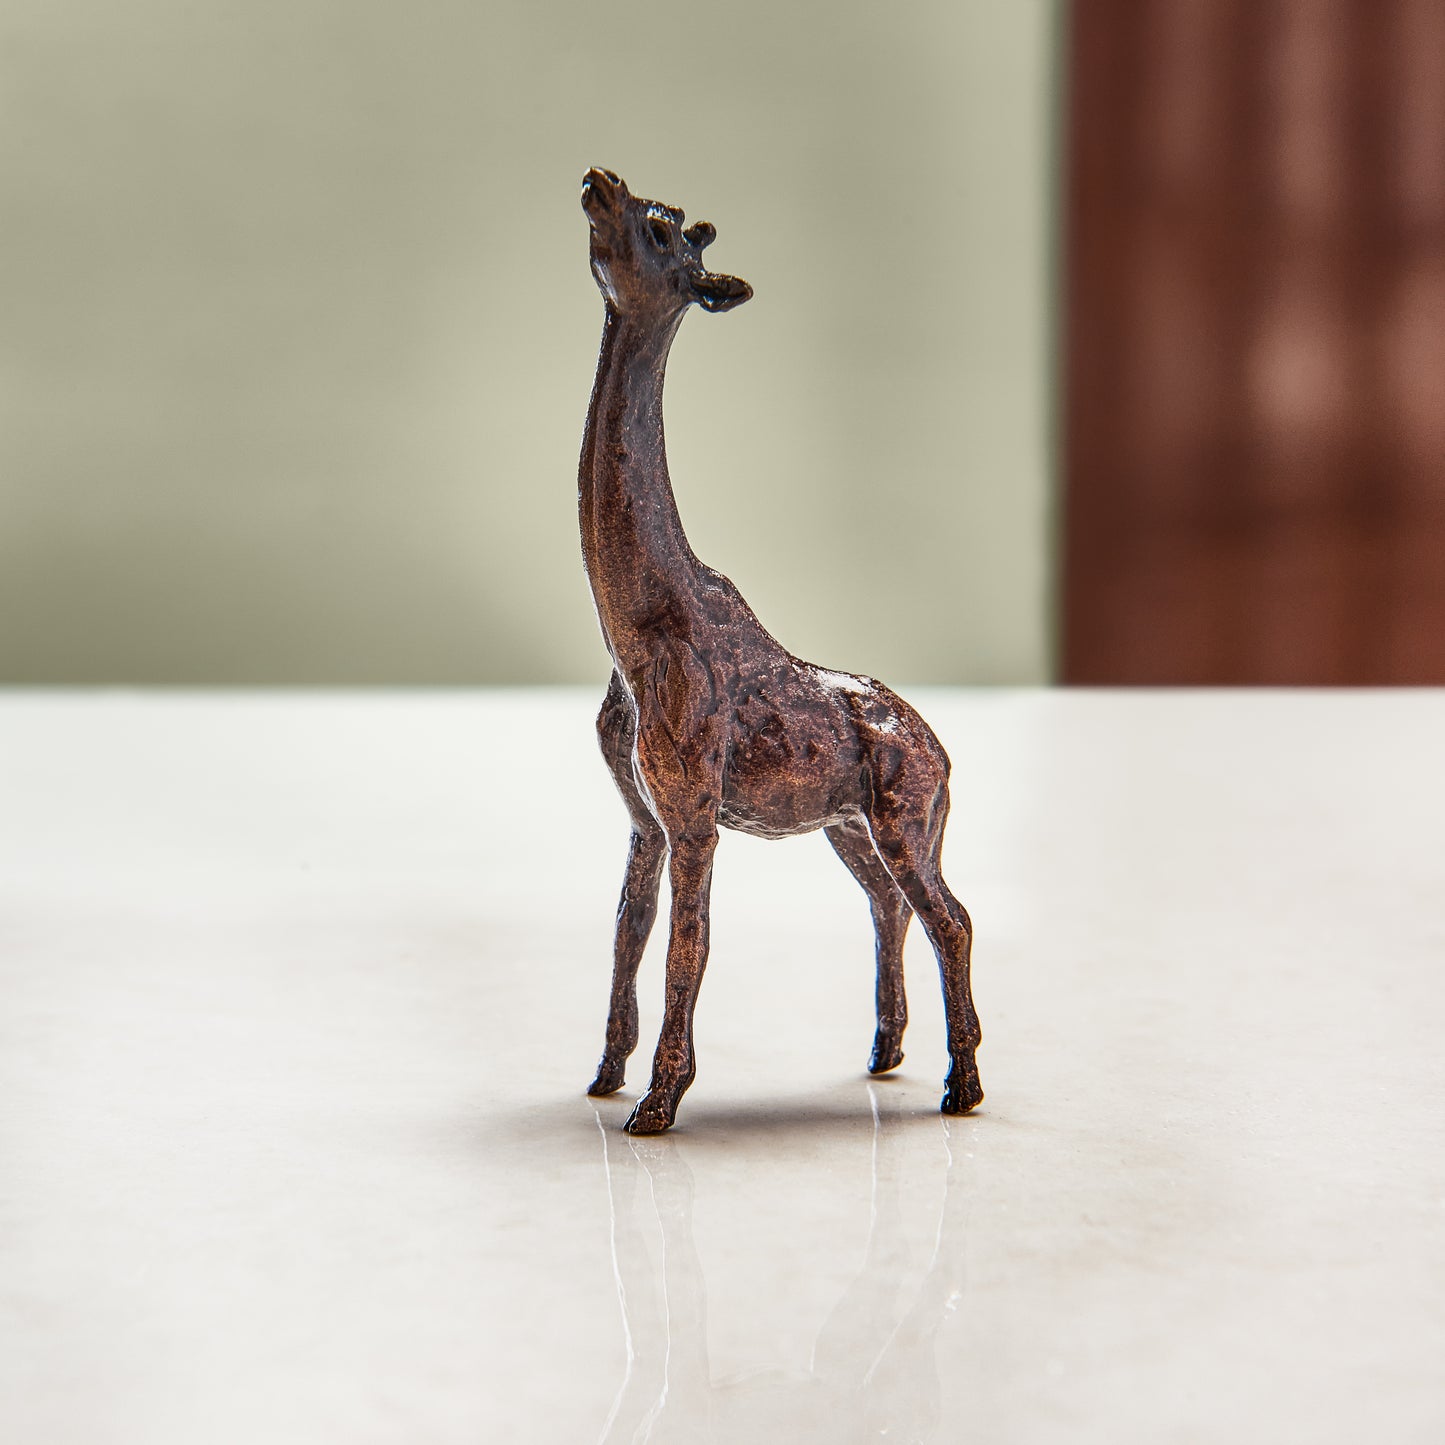 Miniature bronze figurine of a giraffe. Give as a bronze anniversary gift or thoughtful birthday gift.